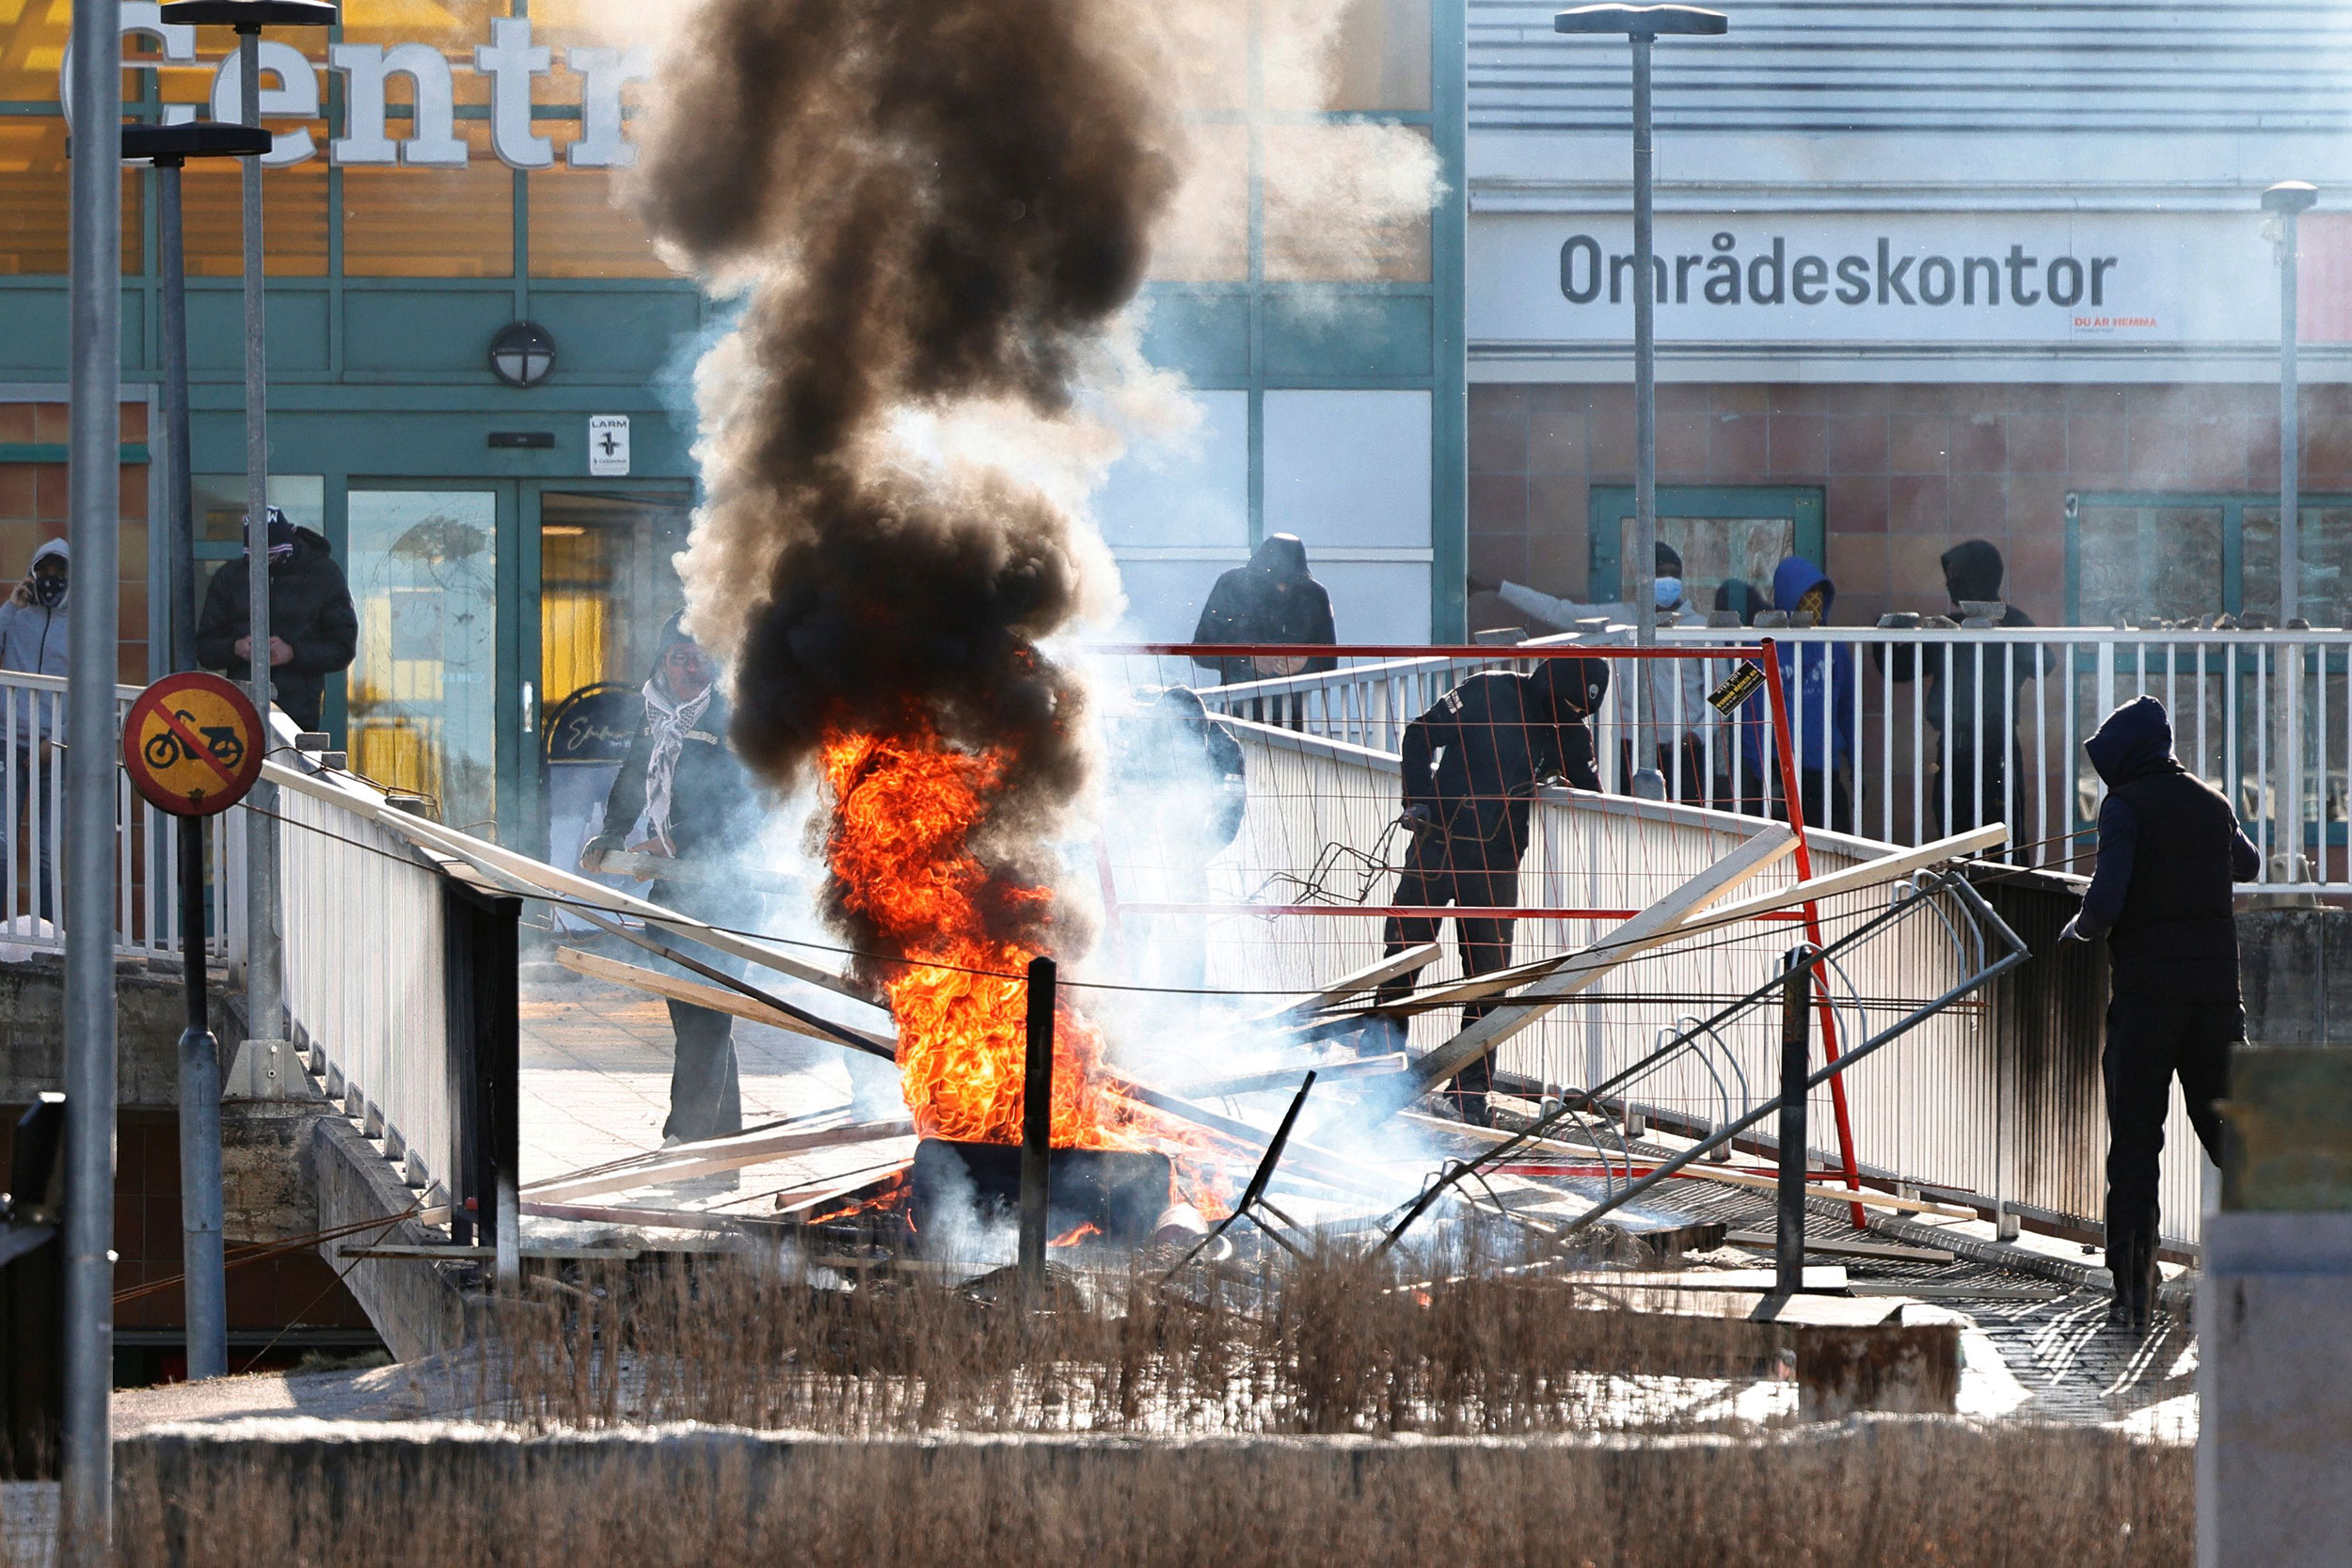 Protesters burn a barricade at the entrance to a shopping center during rioting in Norrkoping, Swed...